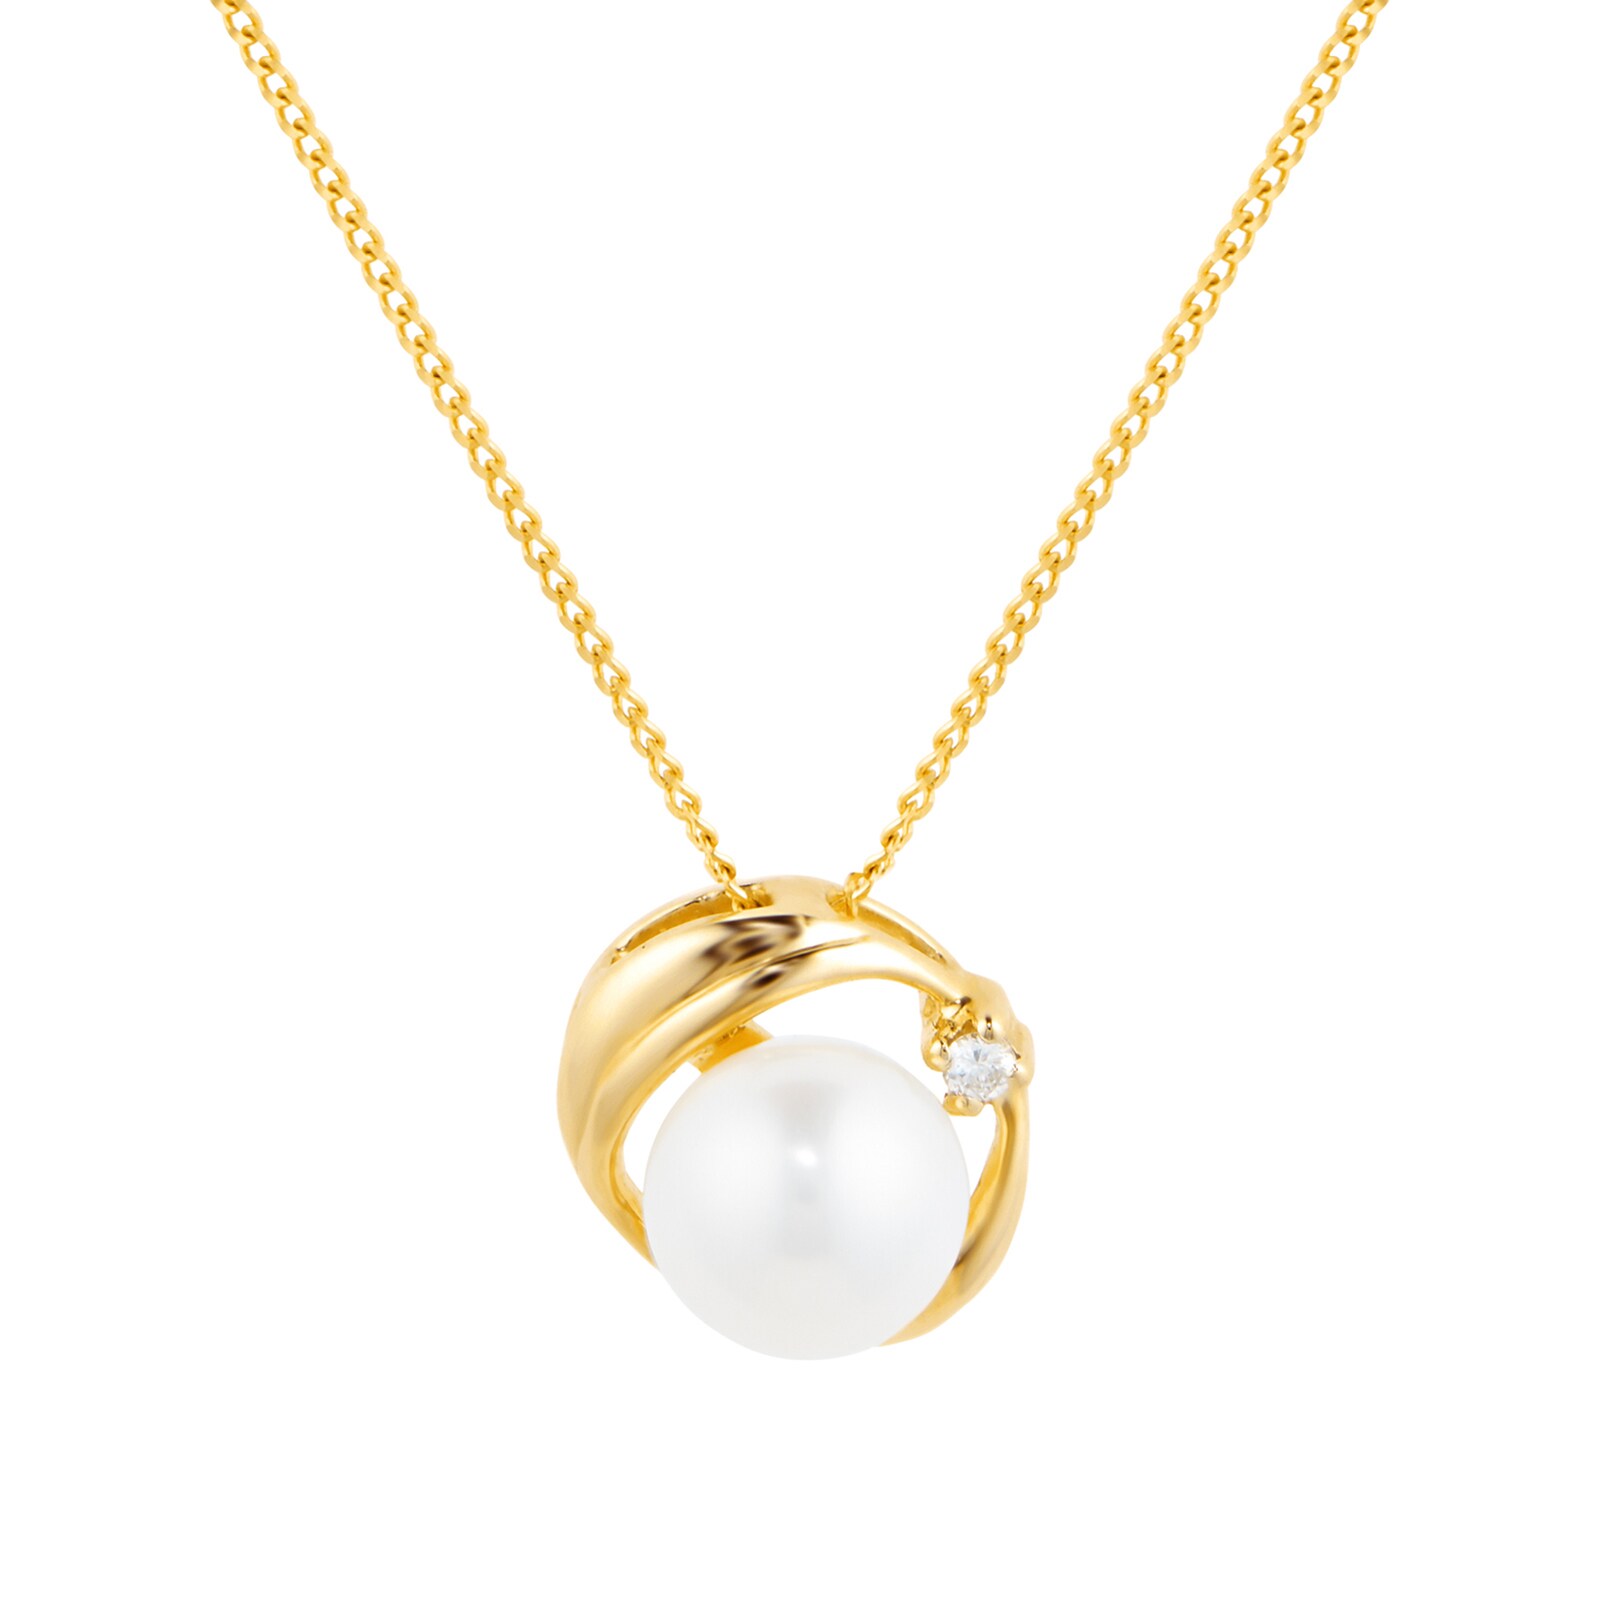 9ct Yellow Gold Pendant with Fresh Water Pearl & 0.02ct Diamond